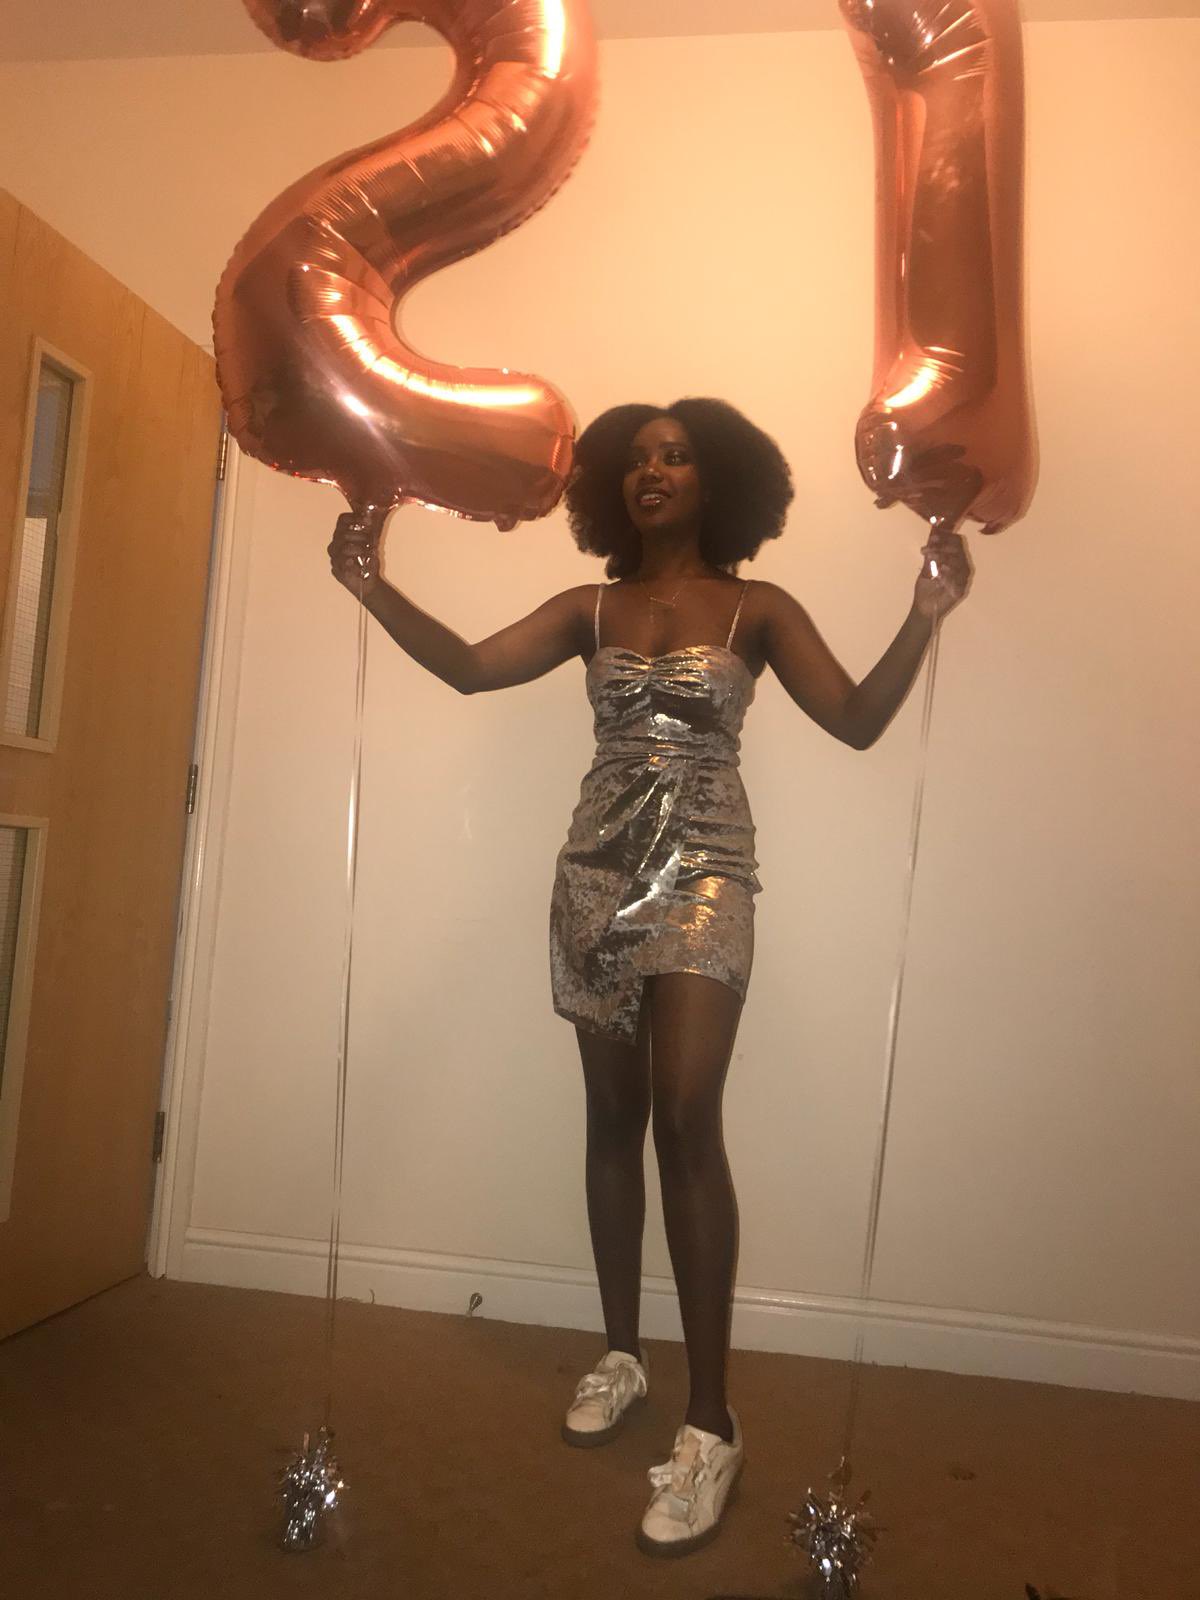 N on X: "Repurposed my 21st birthday dress for my 24th birthday outfit! My mind, ugh https://t.co/ZDR3sHL6iS" / X